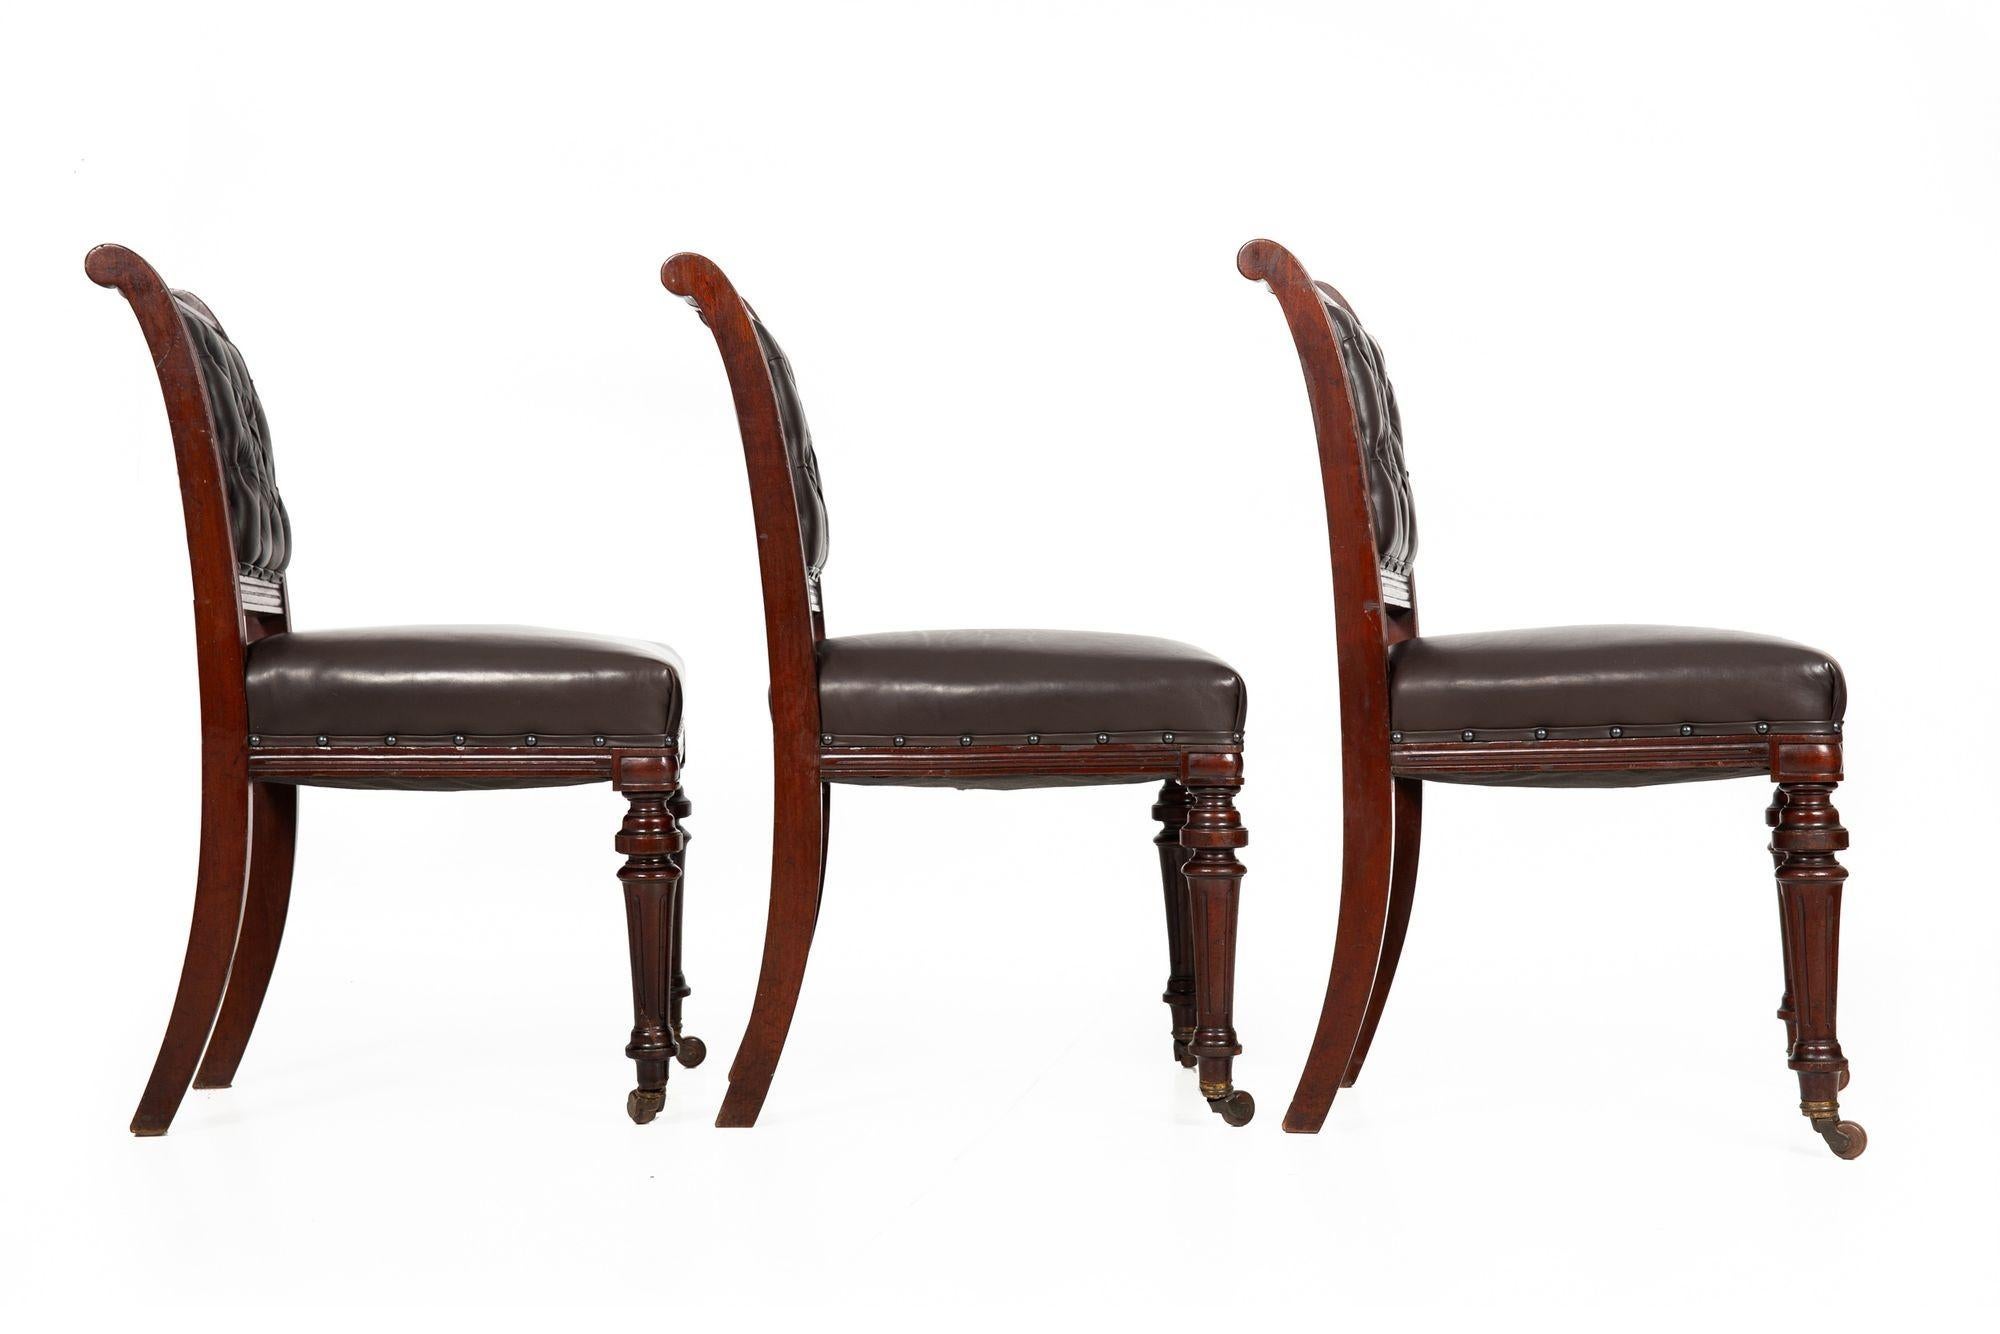 Set of 6 English Antique Mahogany and Leather Dining Chairs, 19th Century 1